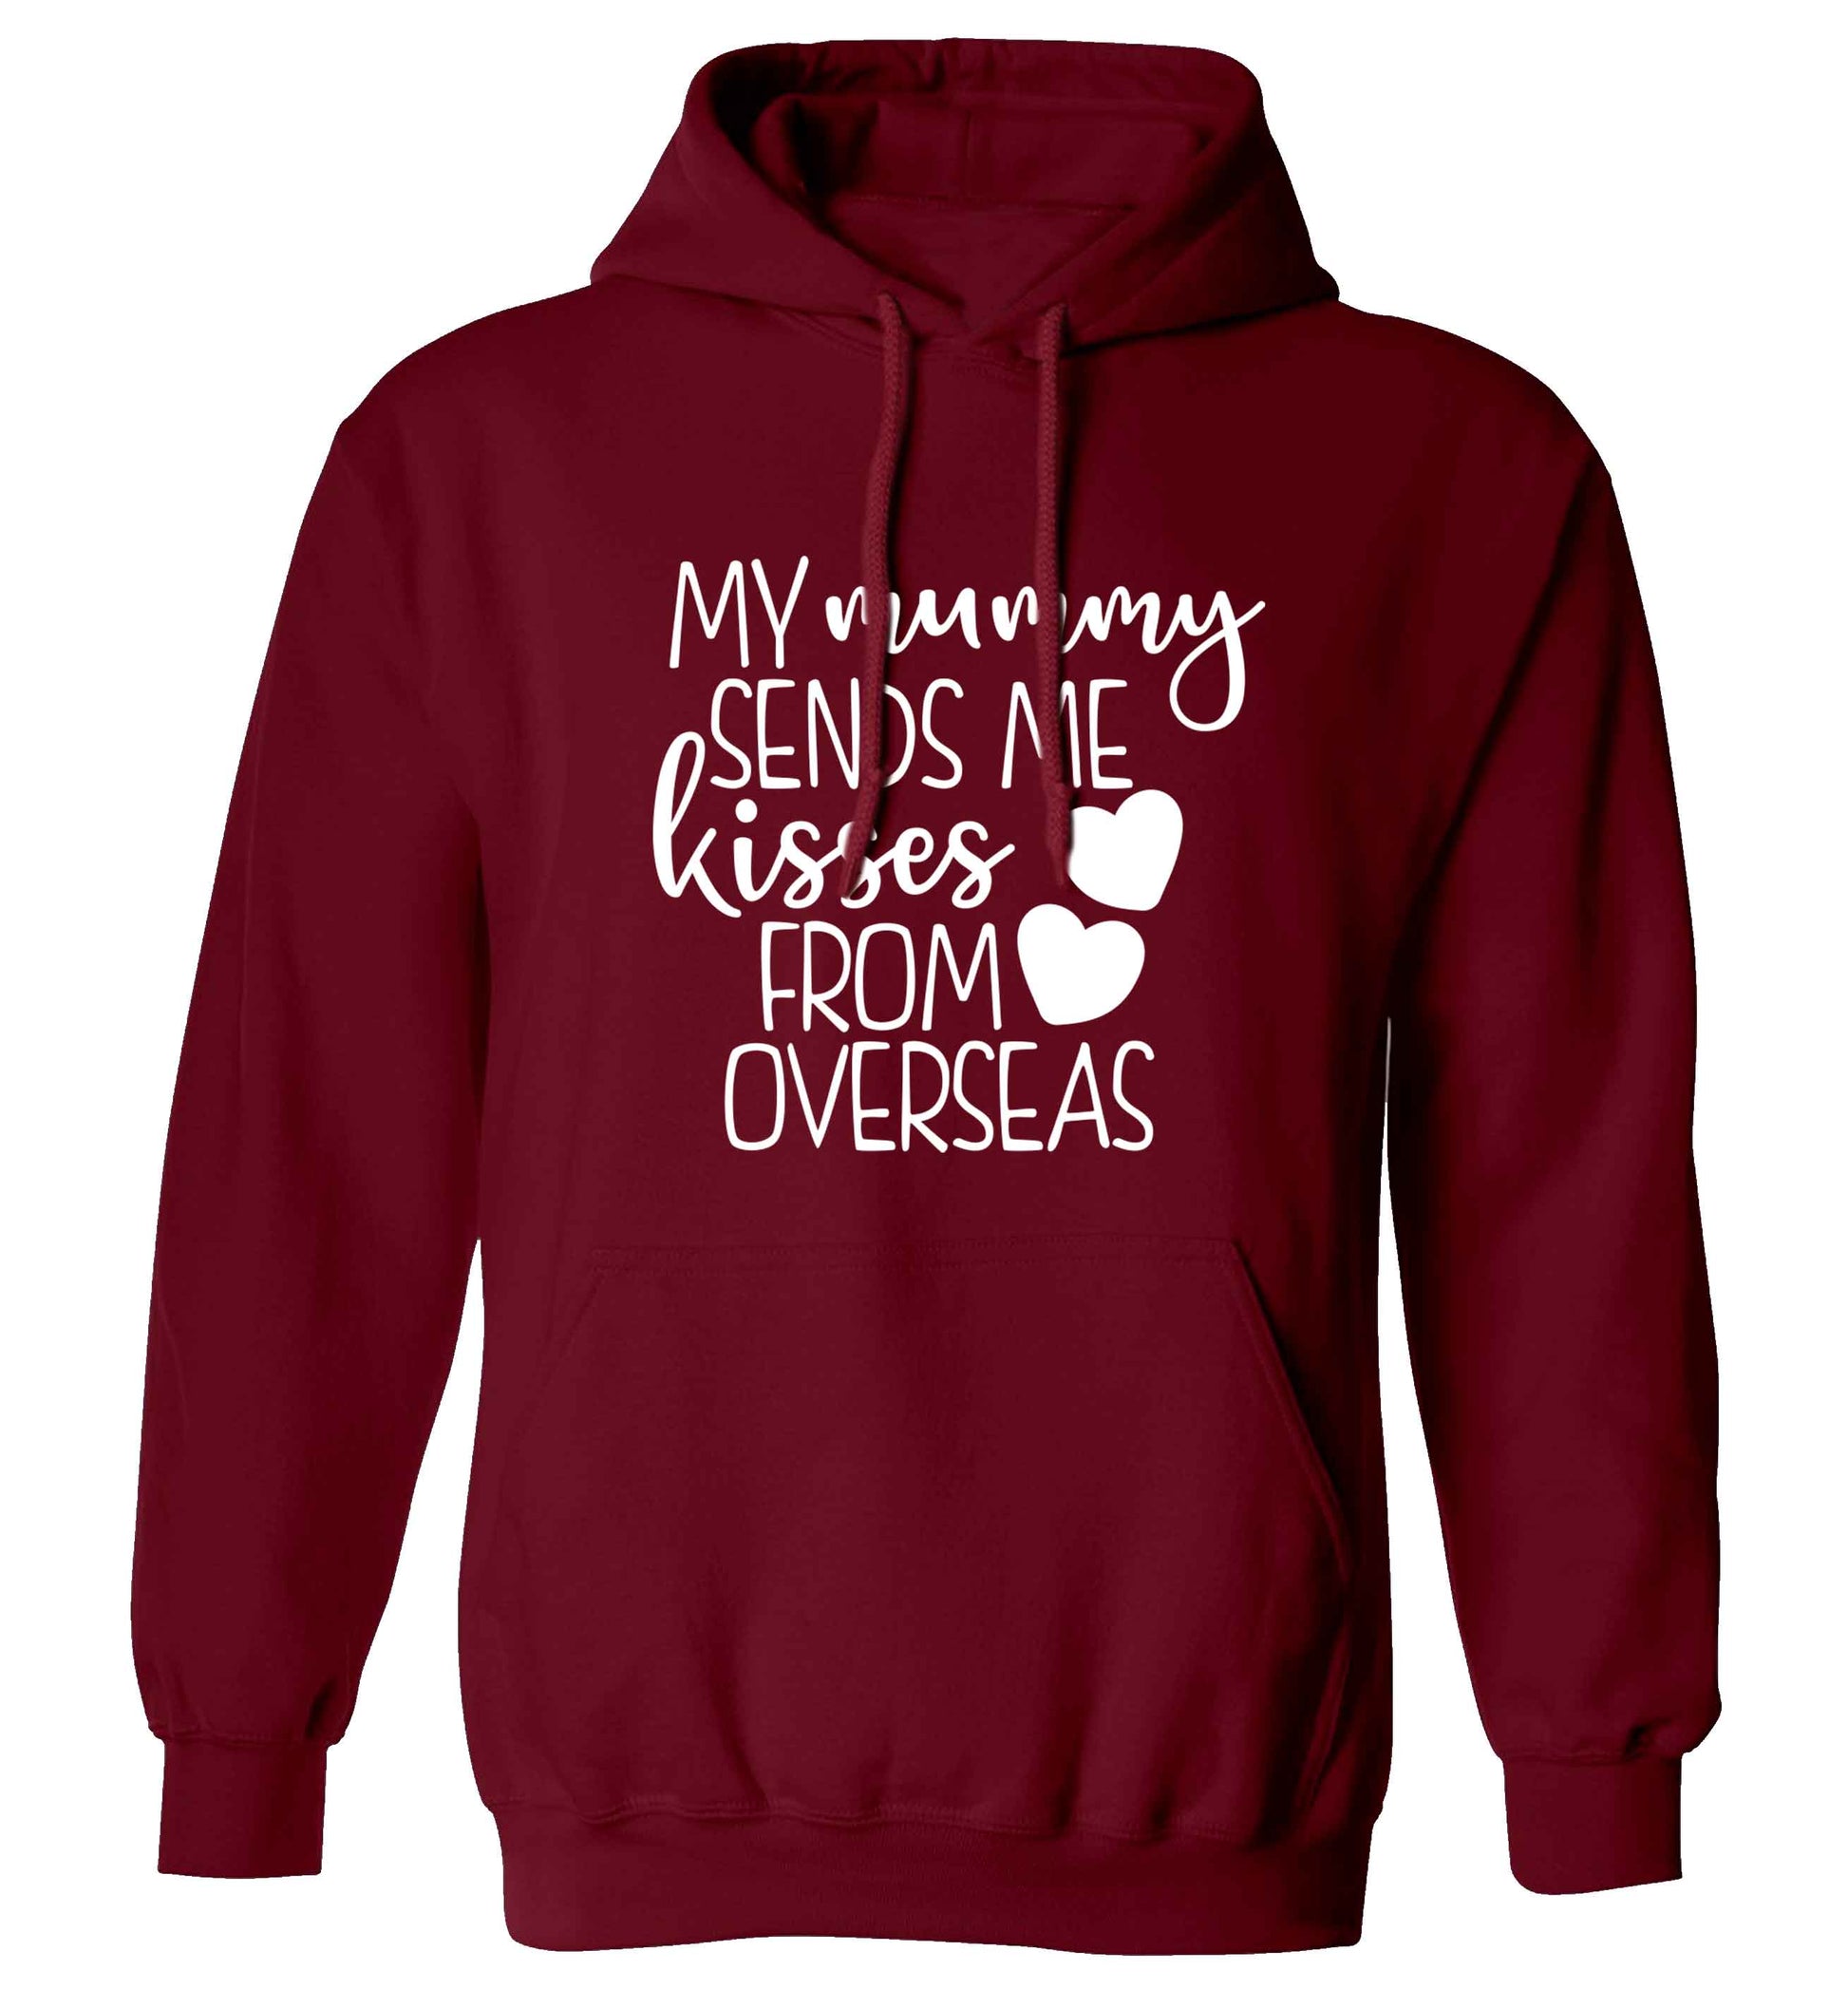 My mummy sends me kisses from overseas adults unisex maroon hoodie 2XL